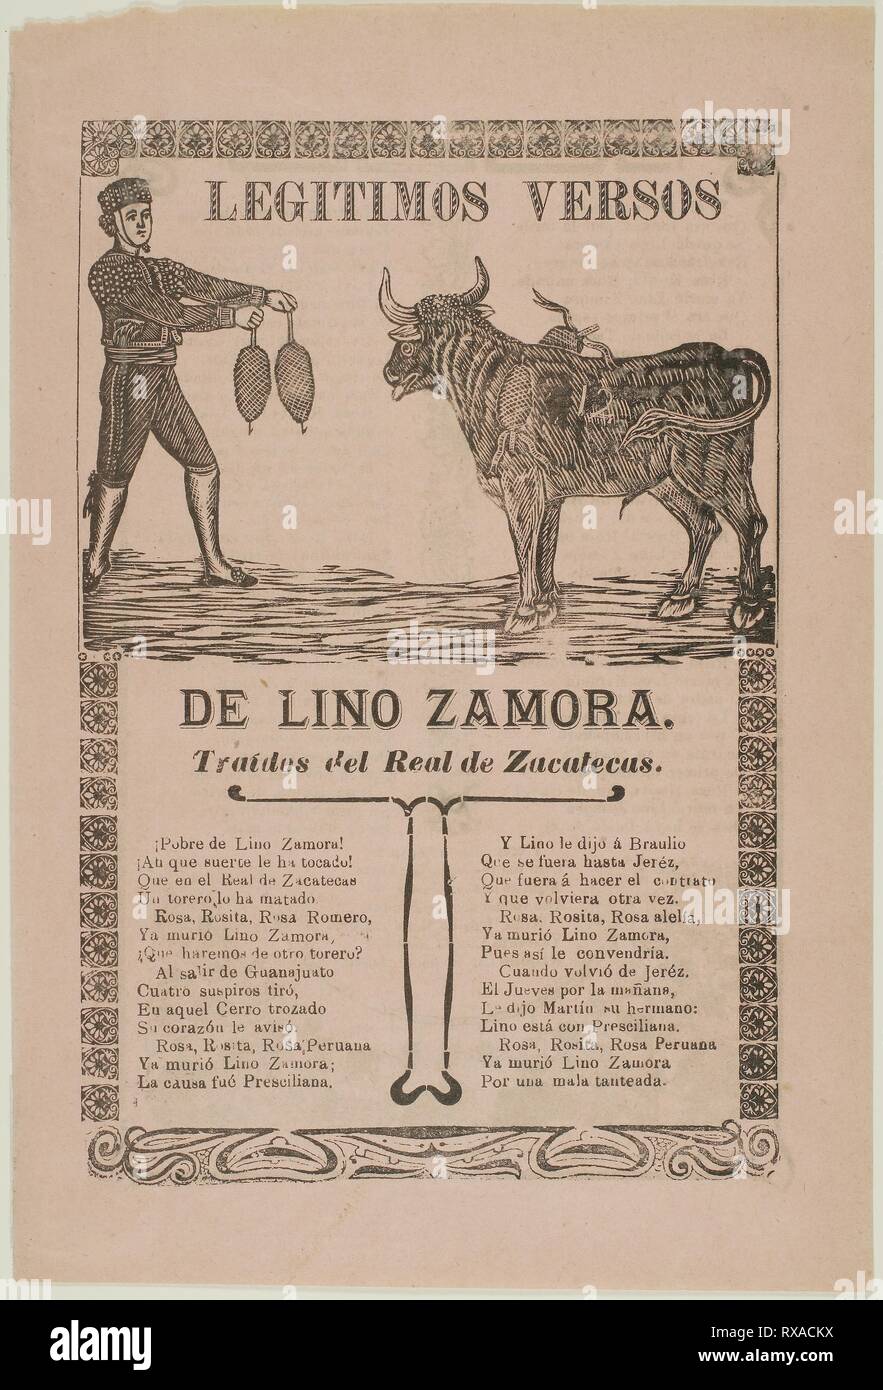 True Verses about Lino Zamora. José Guadalupe Posada (Mexican, 1852-1913); or Manuel Manilla (Mexican, 1830-c. 1900). Date: 1911. Dimensions: 299 x 200 mm. Relief engraving or photo relief etching on pink wove paper. Origin: Mexico. Museum: The Chicago Art Institute. Stock Photo